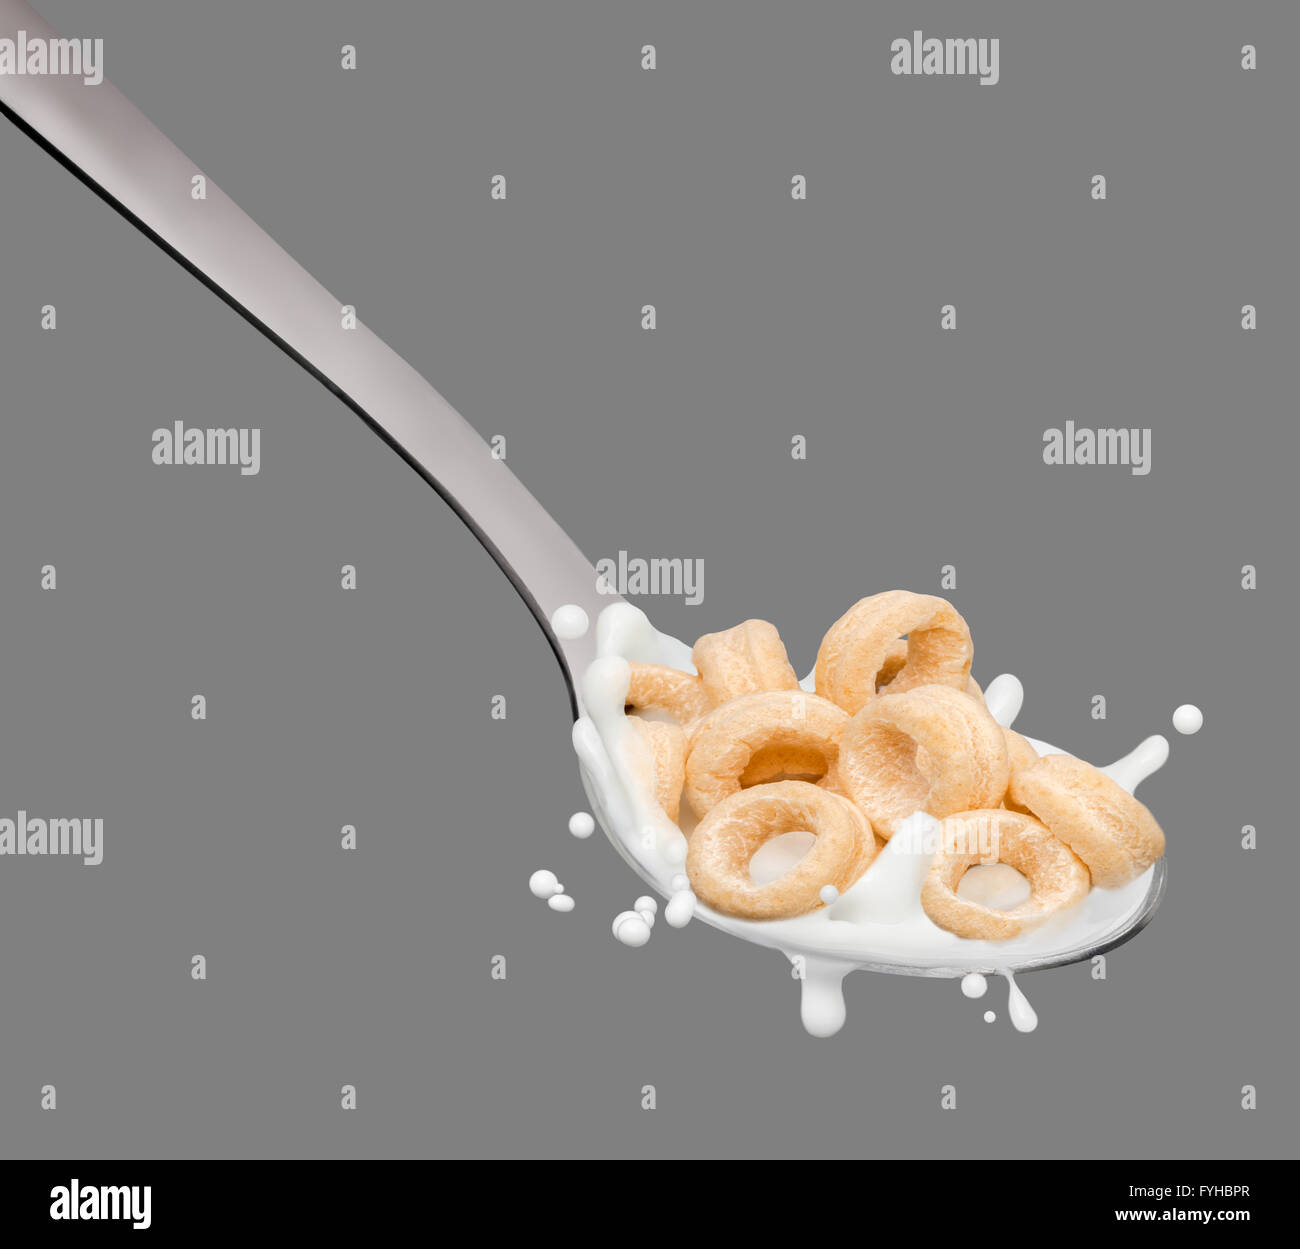 Milk splashing onto spoon and cereal hoops Stock Photo